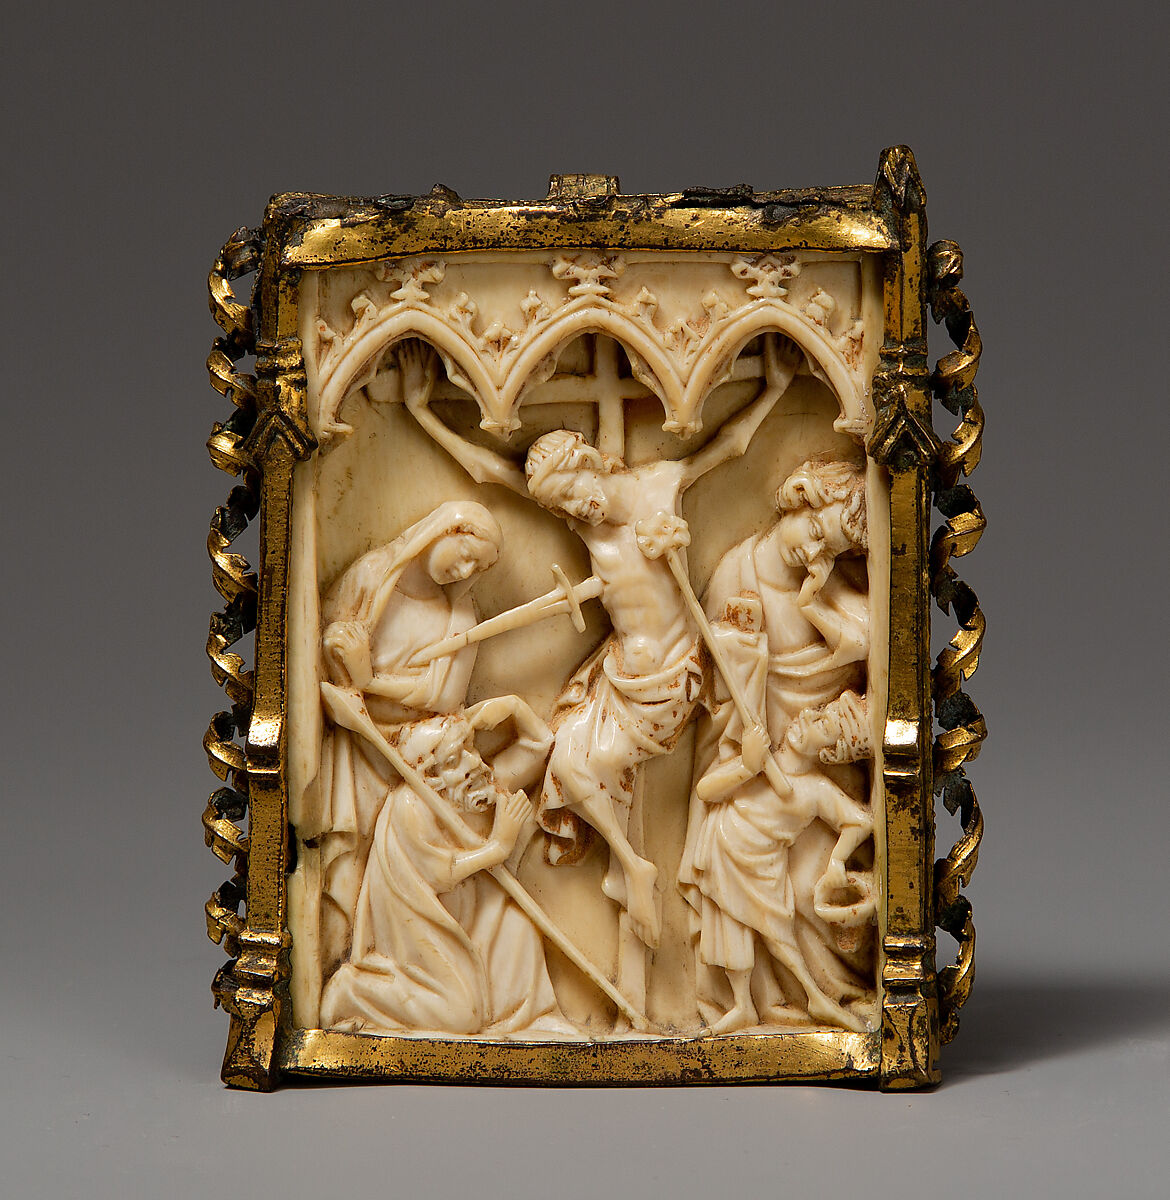 Pax with the Crucifixion, Elephant ivory and copper gilt, South German 